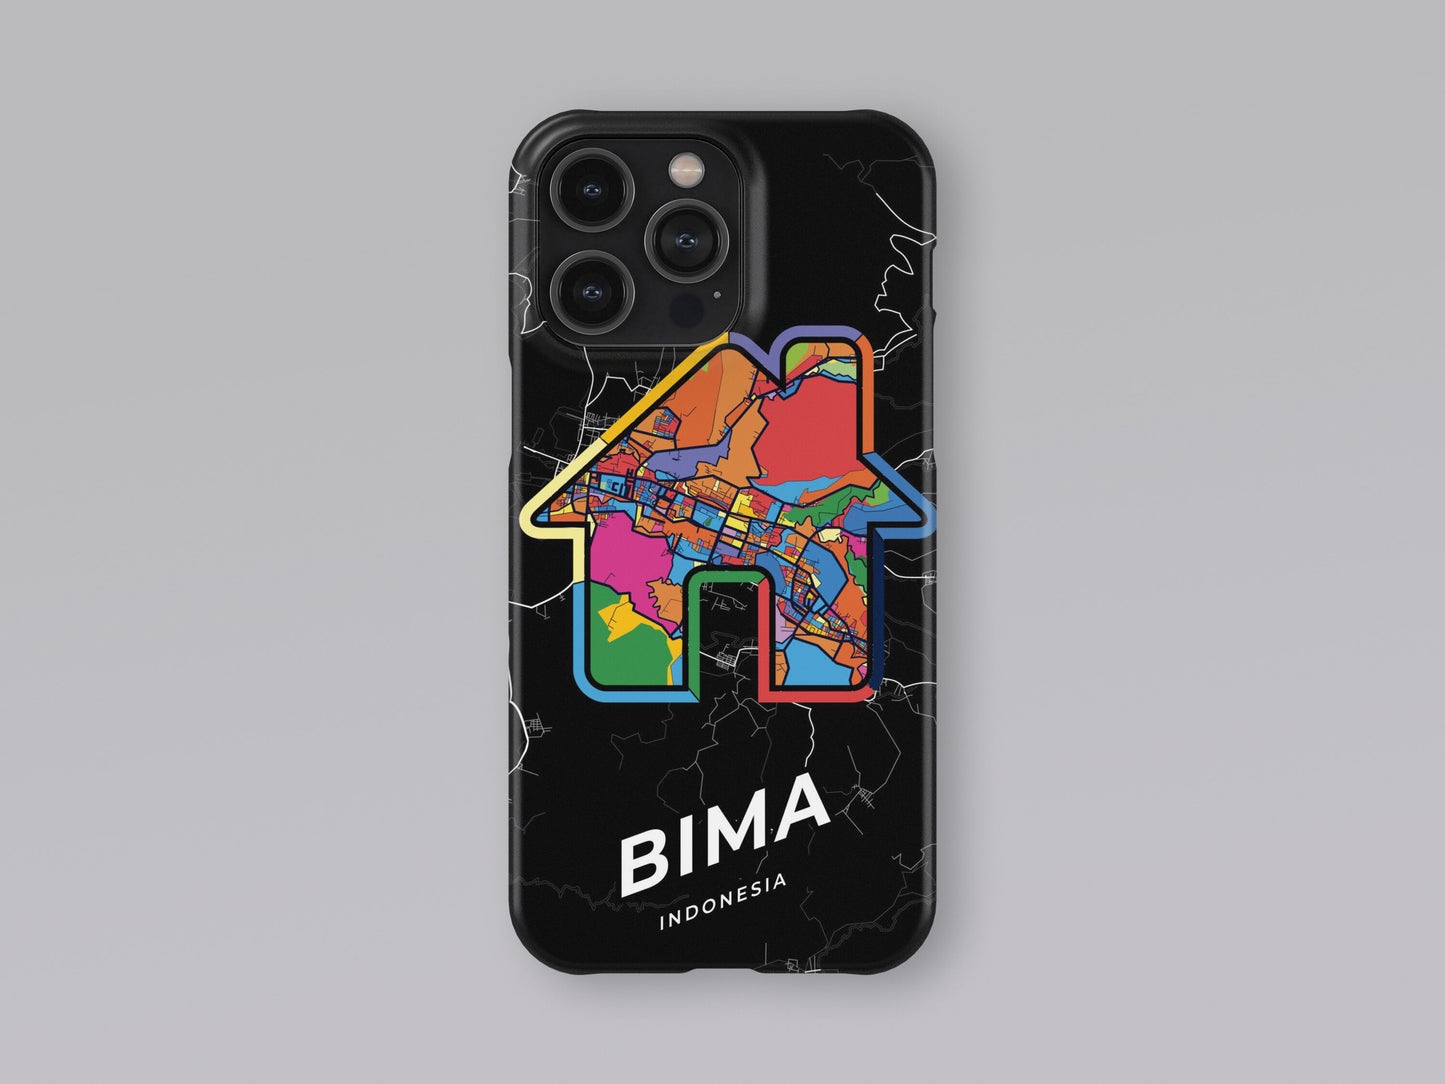 Bima Indonesia slim phone case with colorful icon. Birthday, wedding or housewarming gift. Couple match cases. 3